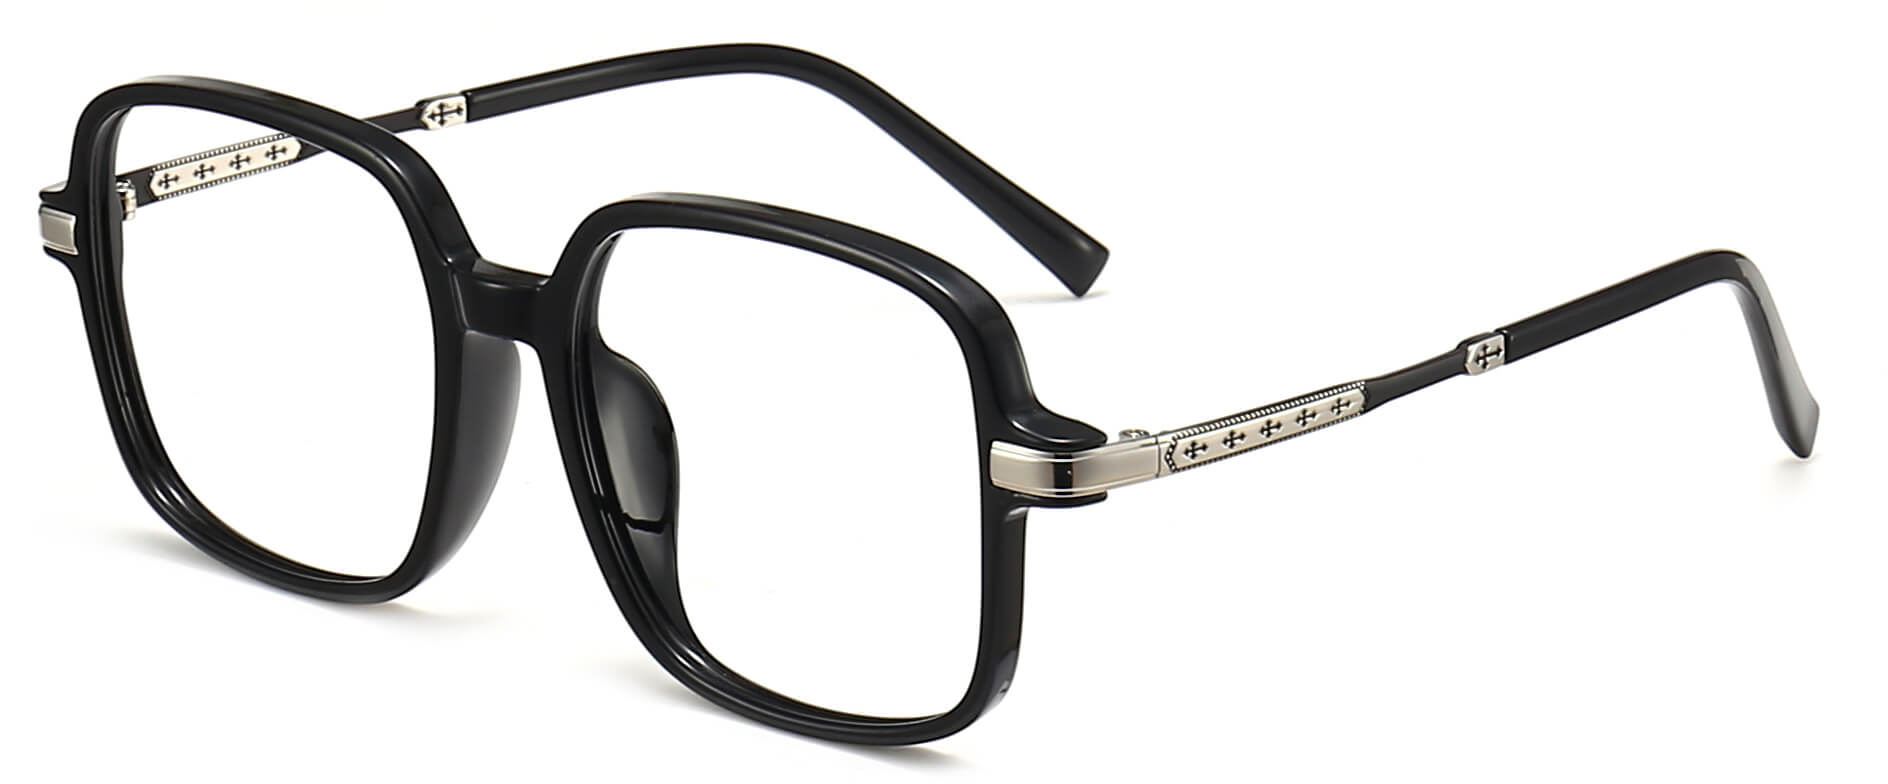 Noe Square Black Eyeglasses from ANRRI, angle view